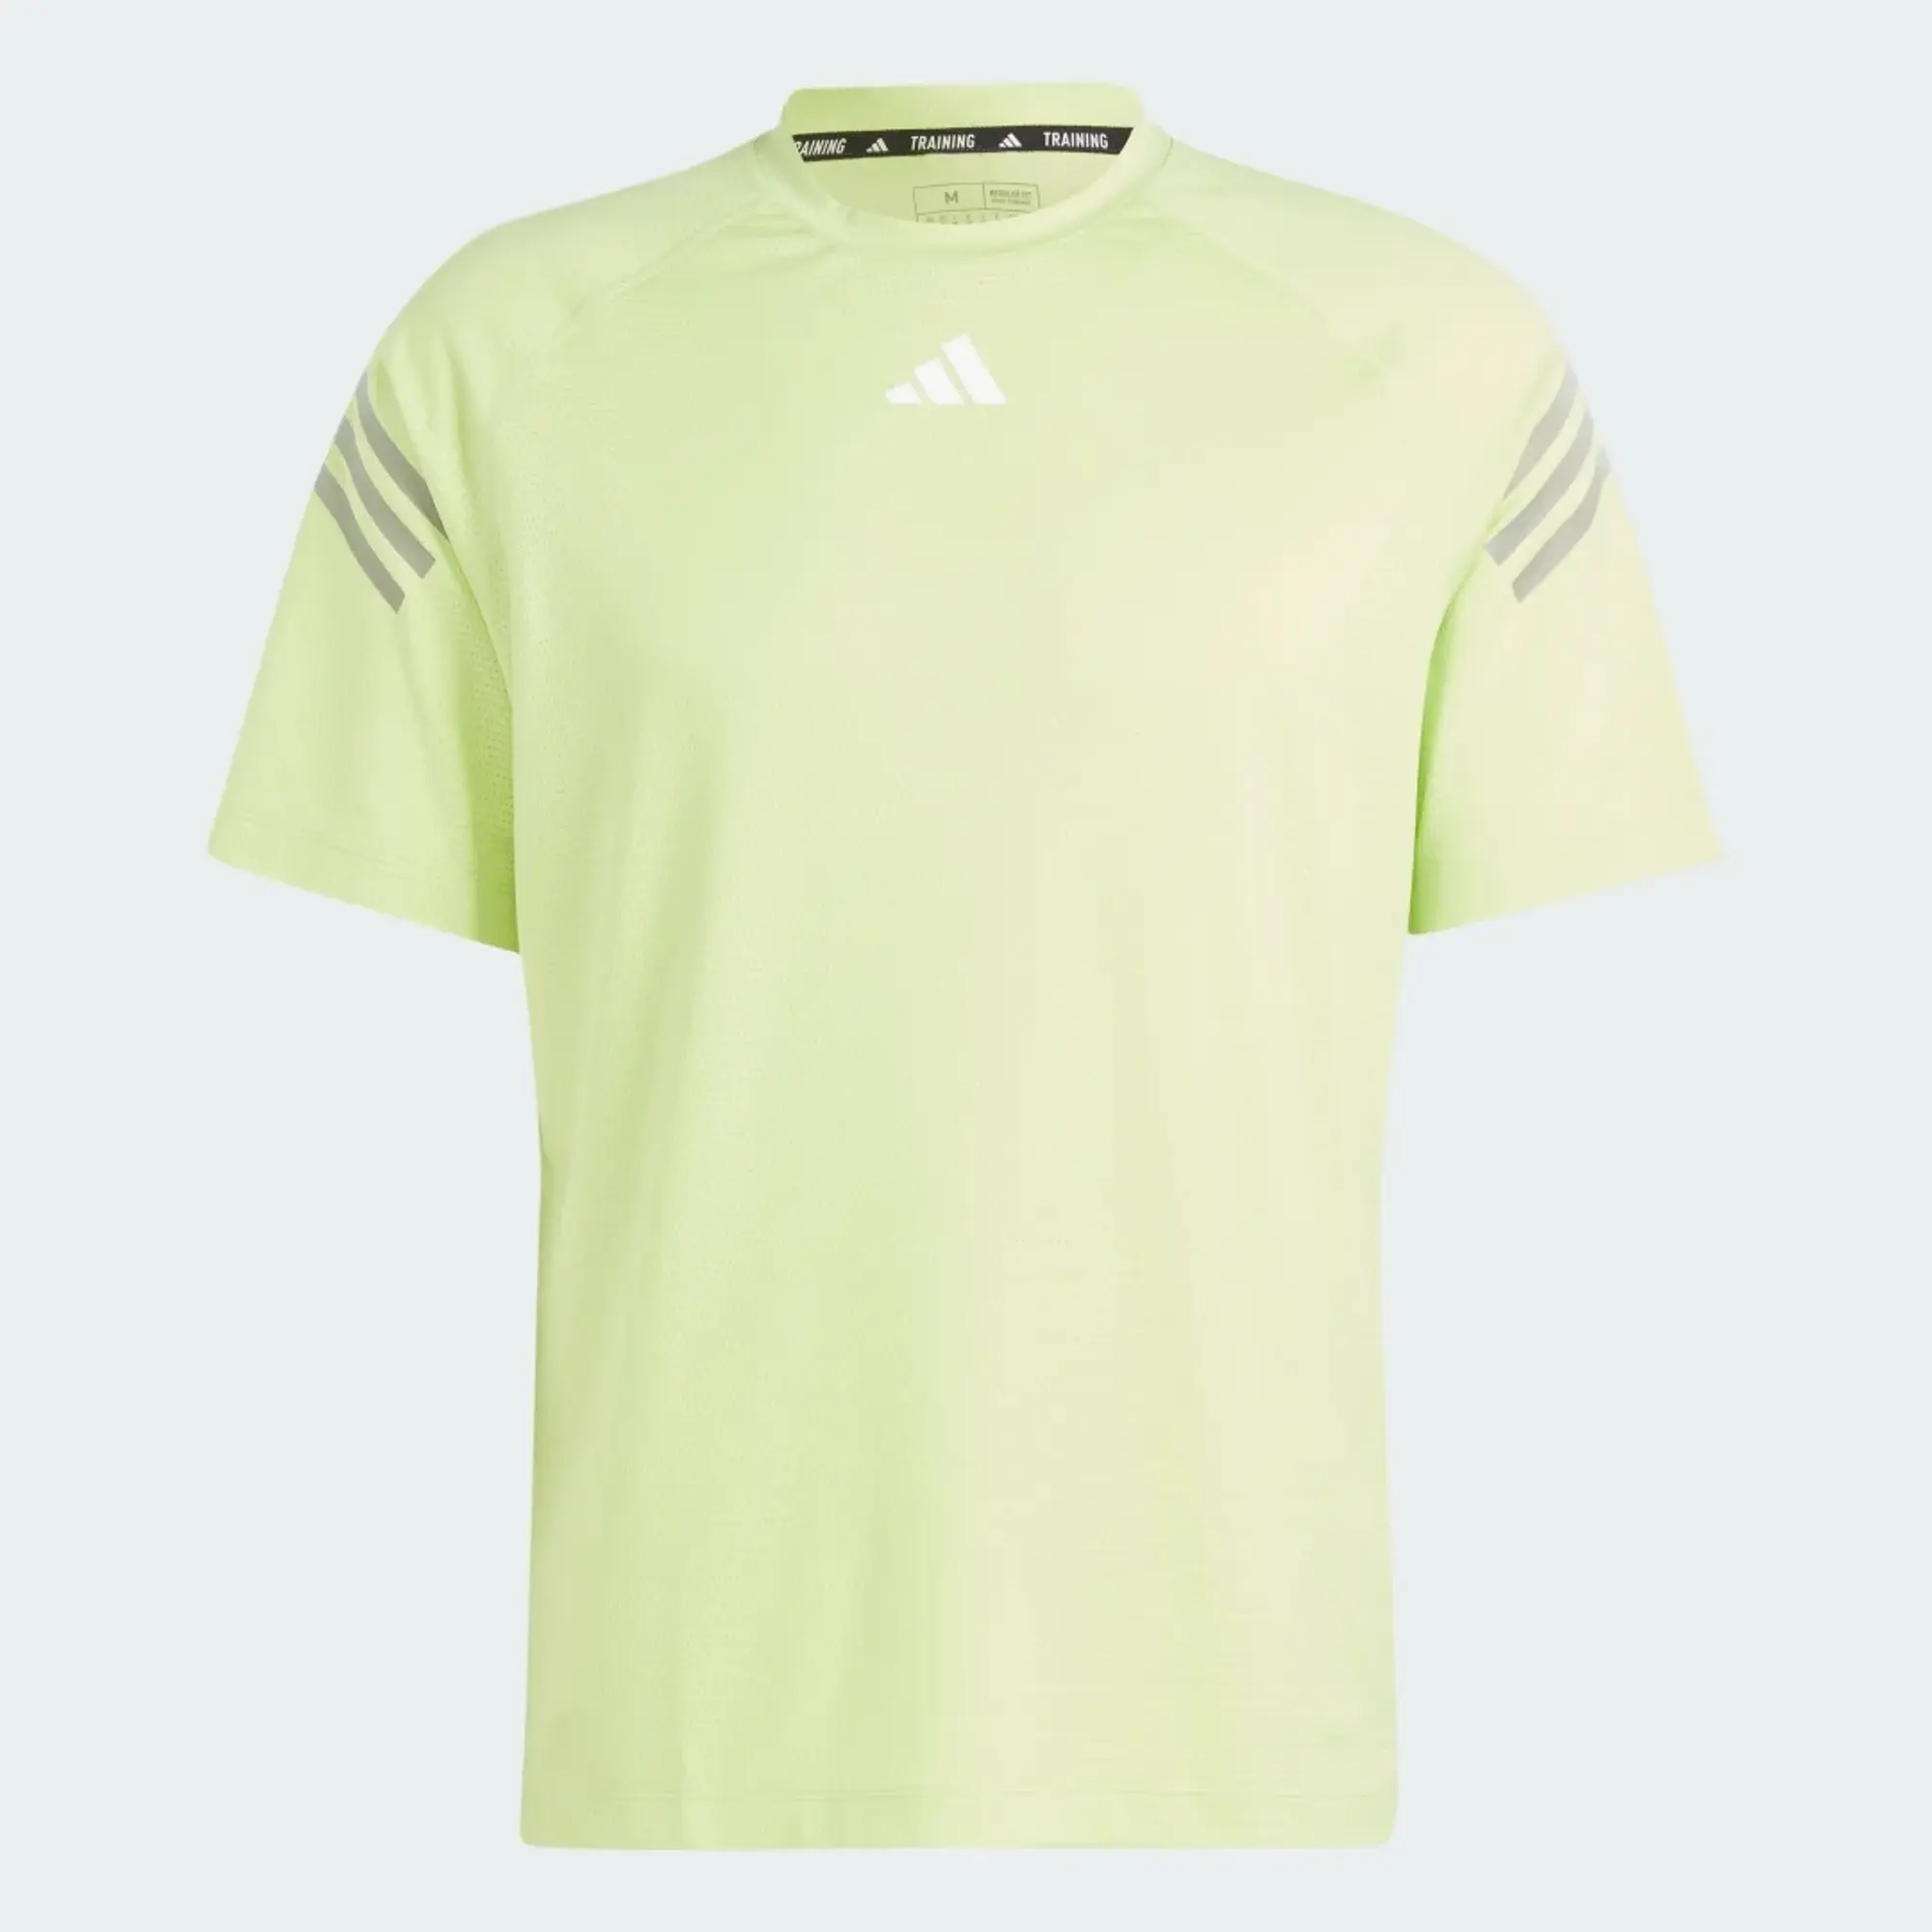 Adidas Training Train Icons T-Shirt In Lime-Green